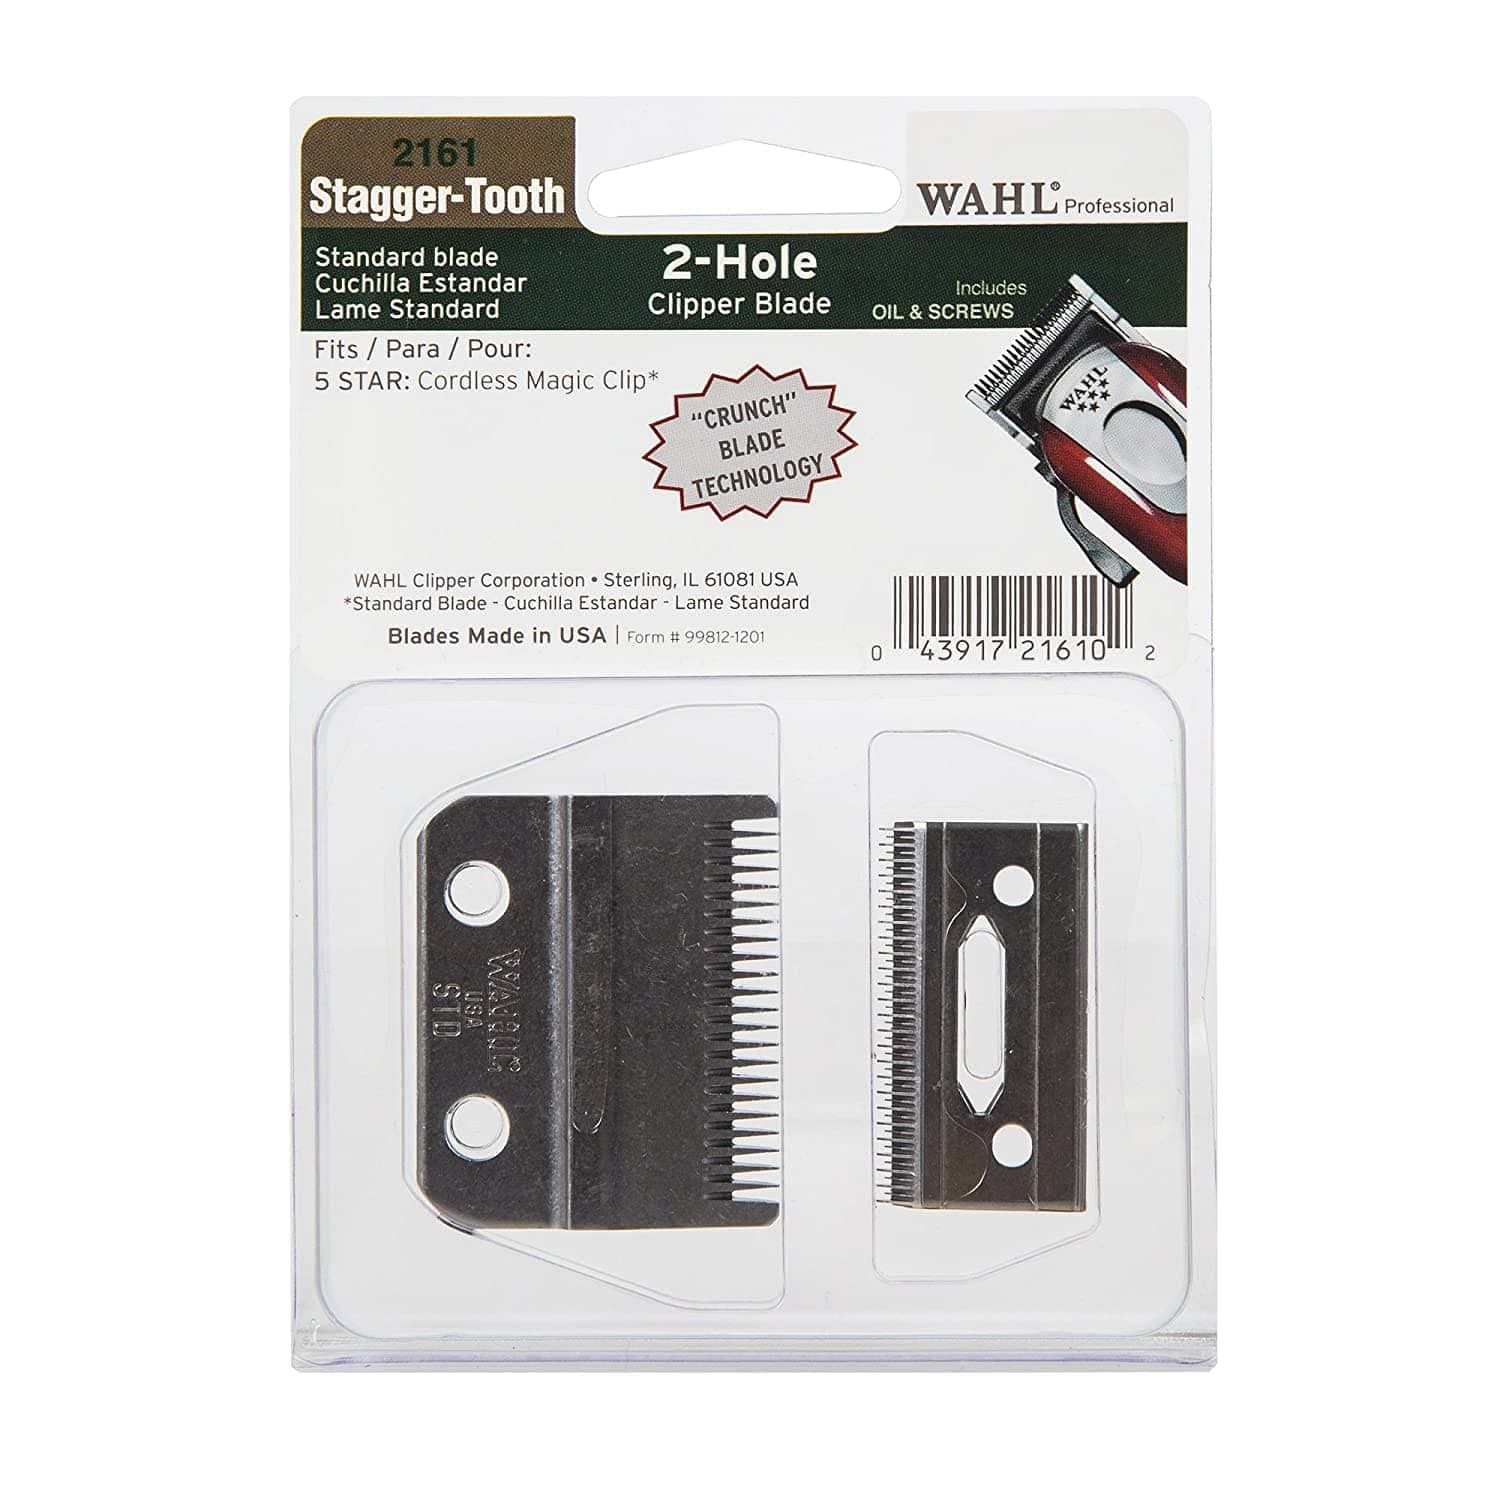 Wahl Stagger Tooth Blade for Magic Clip #02161 - Goldy TV